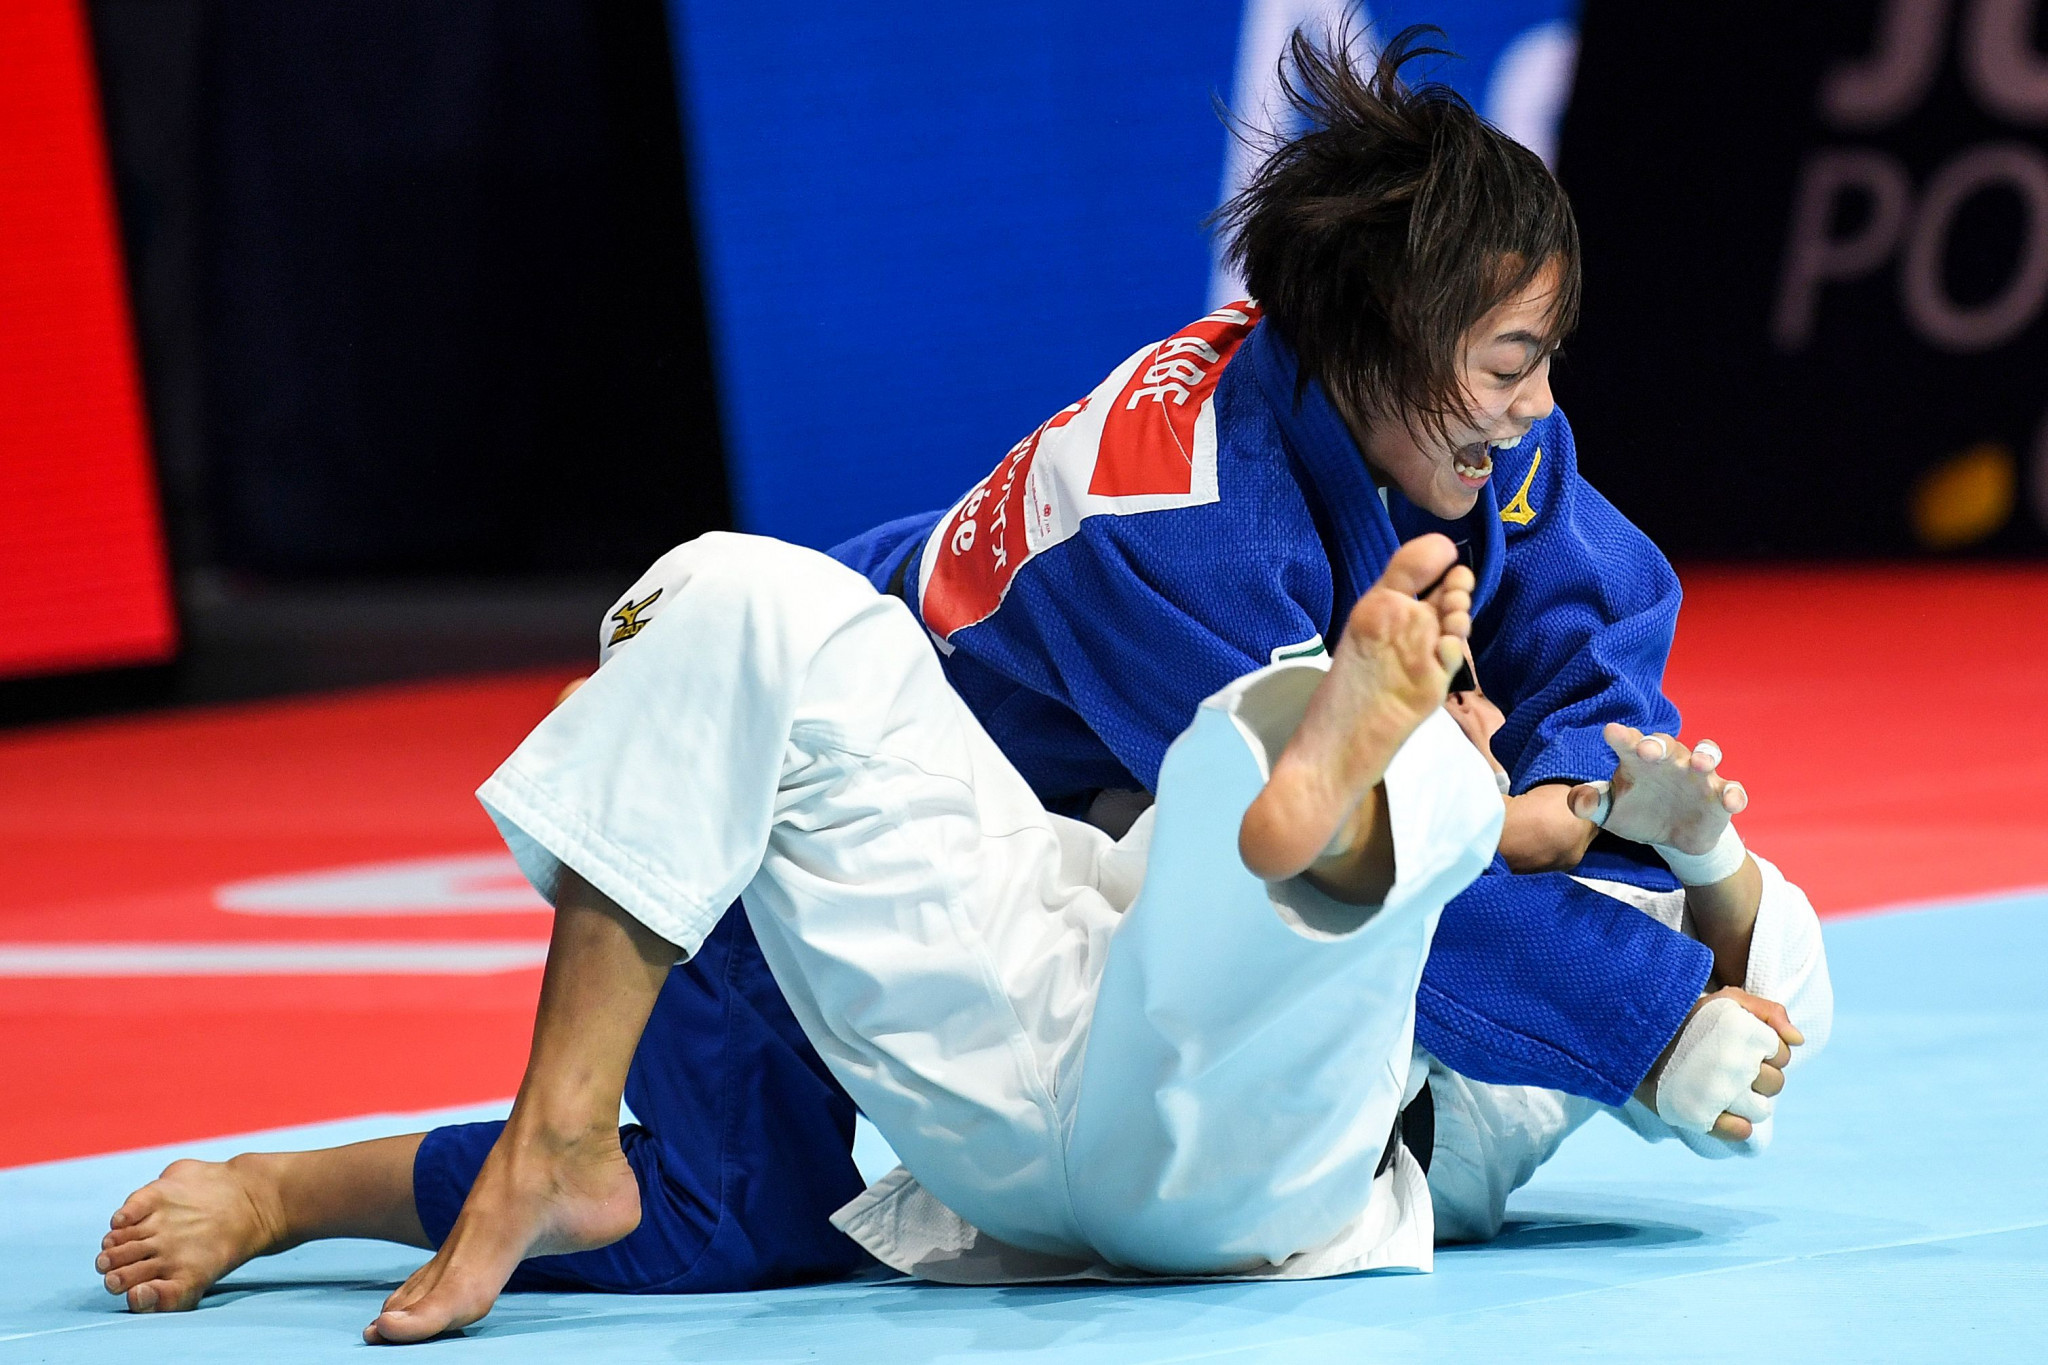 insidethegames is reporting LIVE from the IJF World Championships in Tokyo